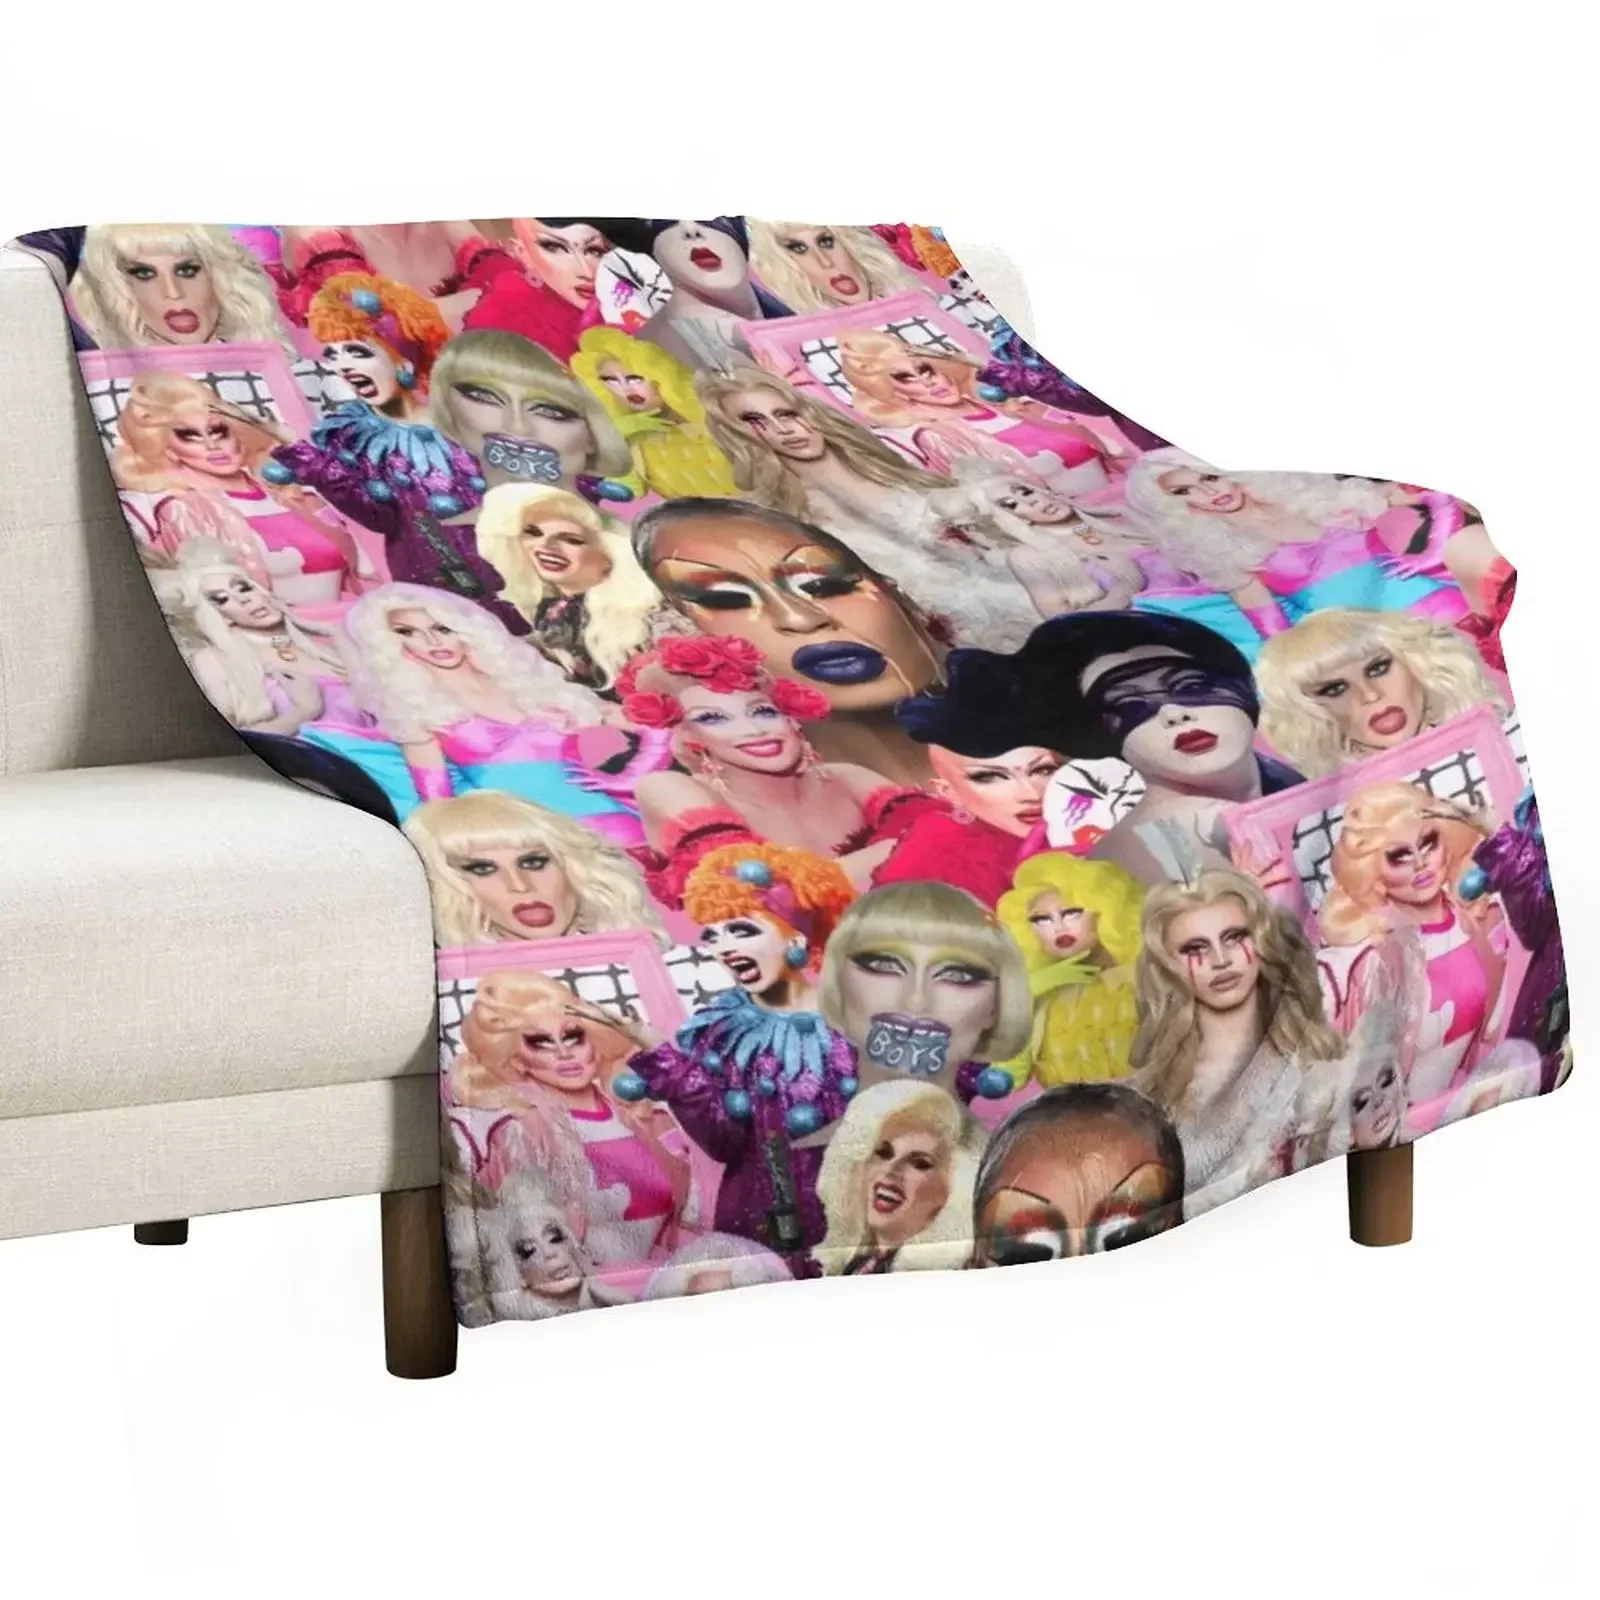 

rupaul drag race collage Throw Blanket Extra Large Throw Thins Blankets